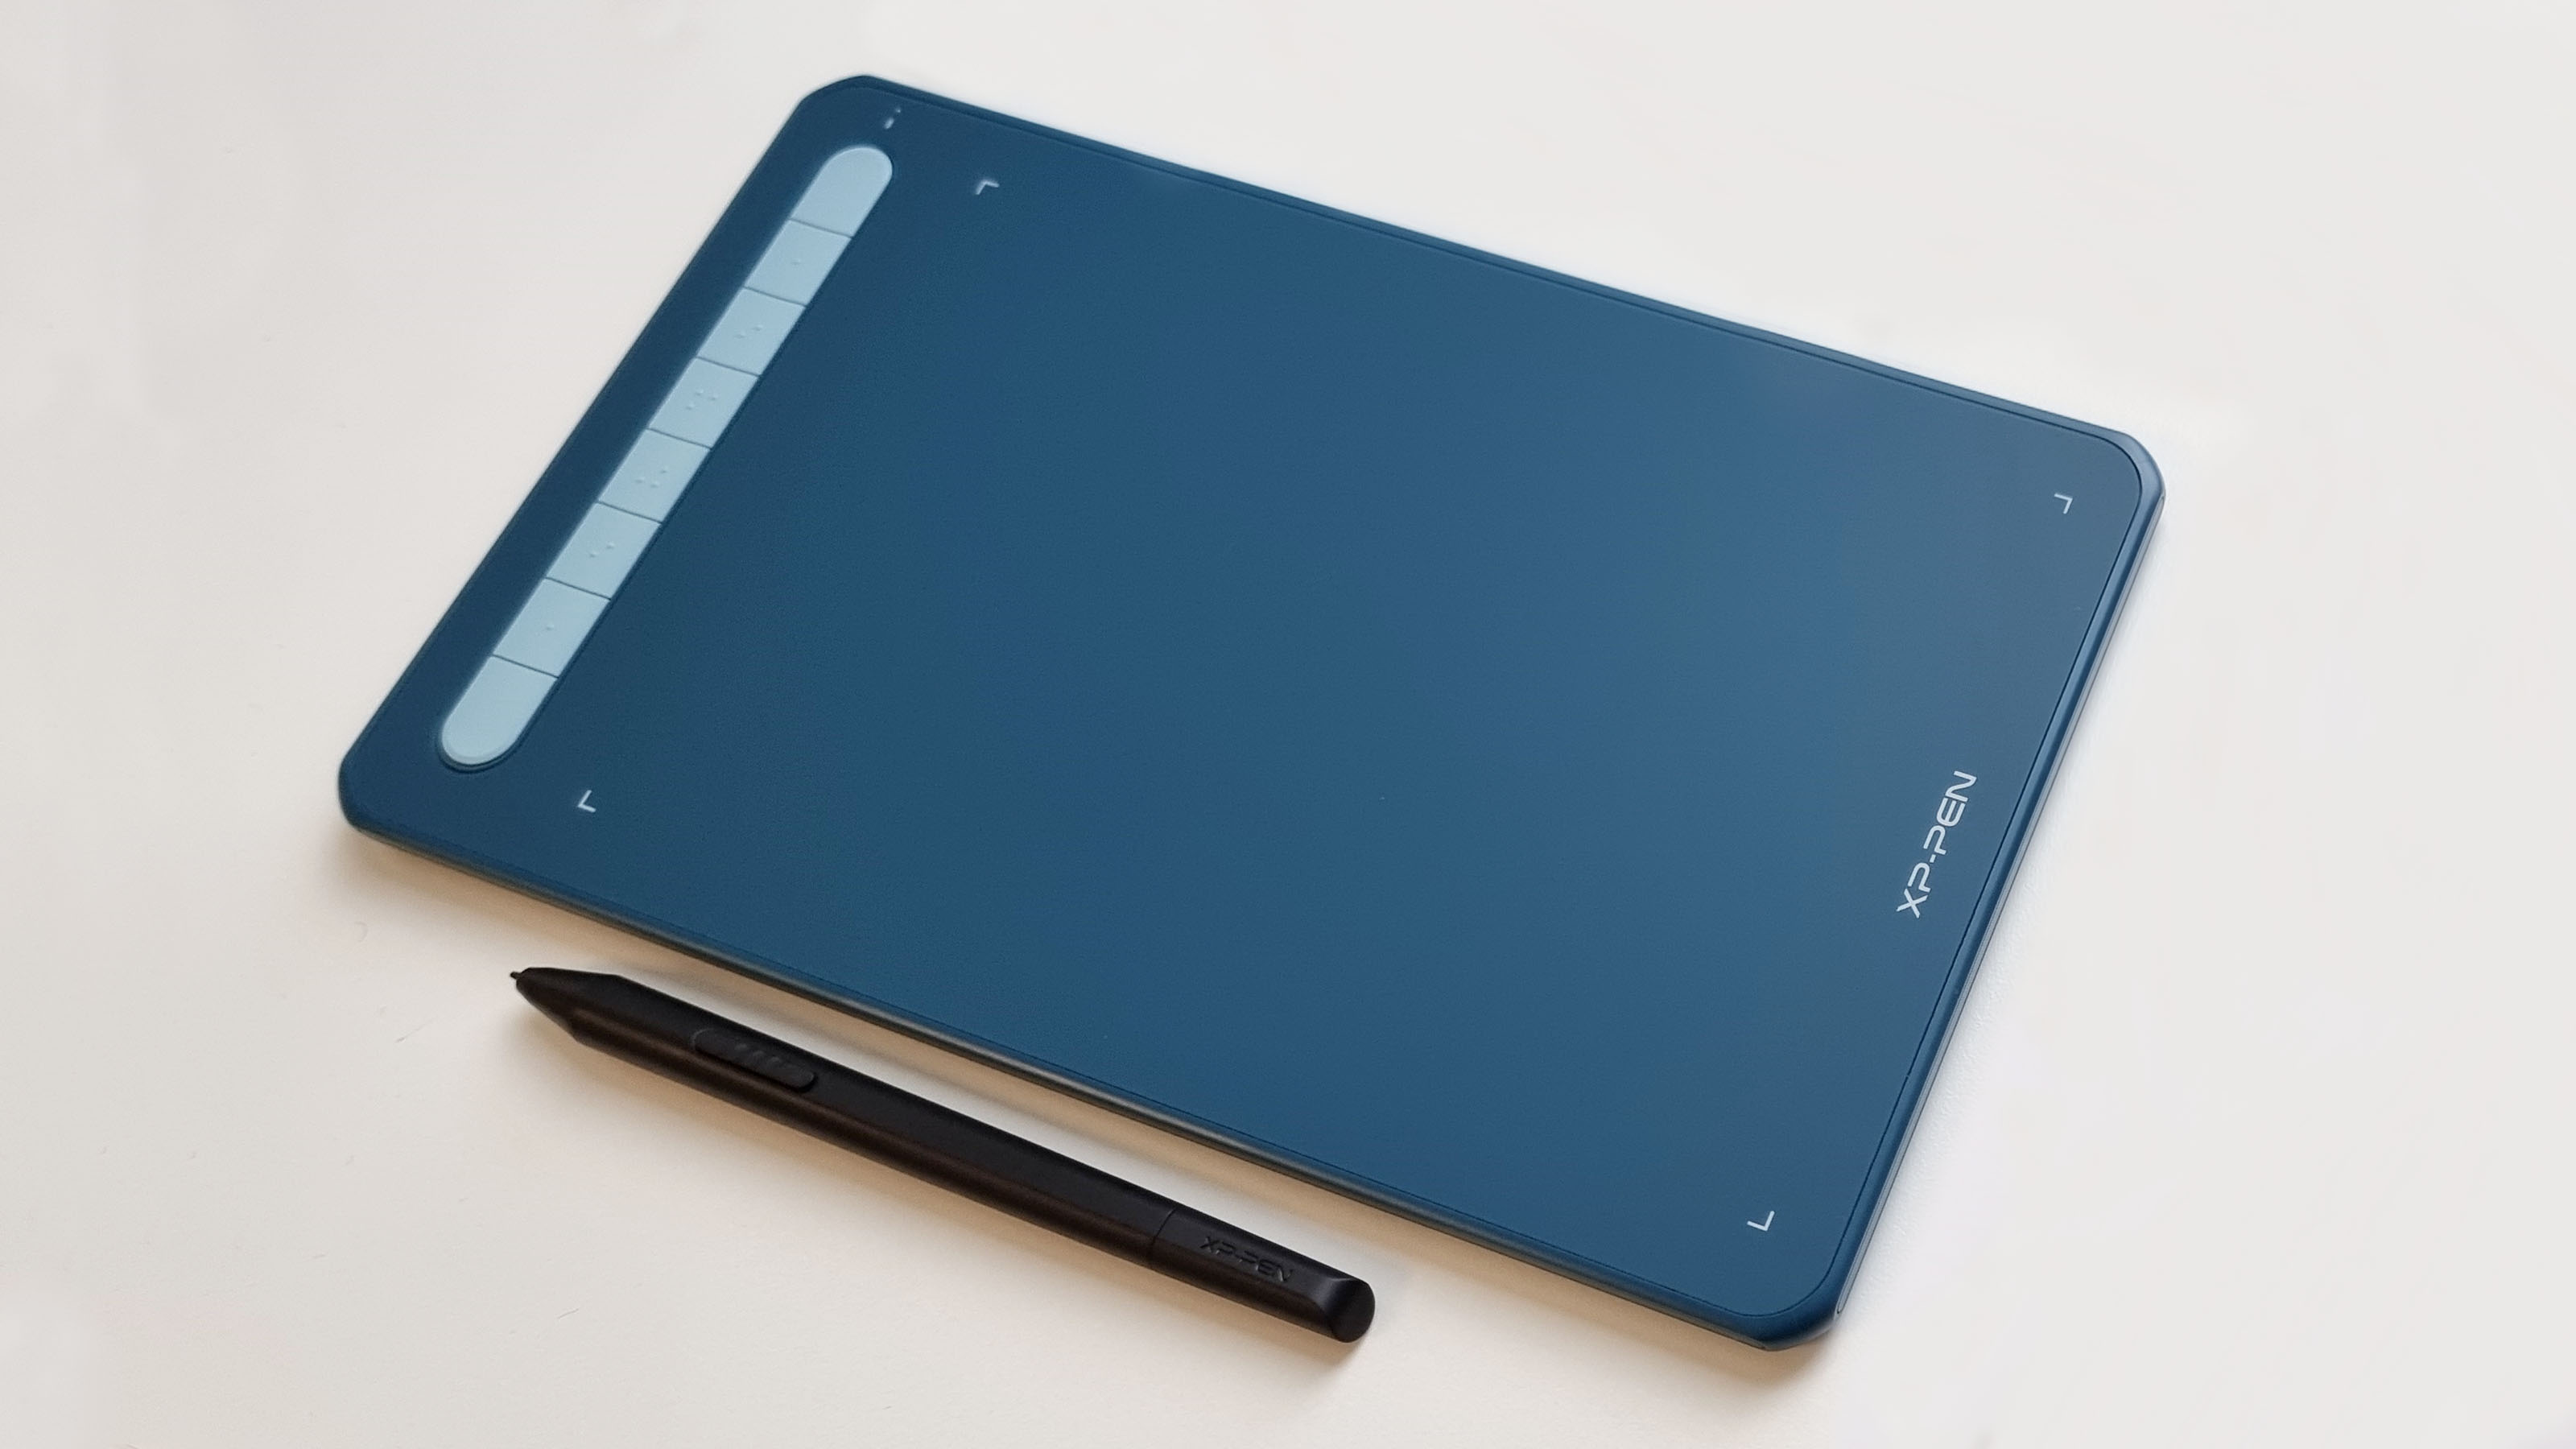 Image of the XP-Pen Deco MW tablet and stylus